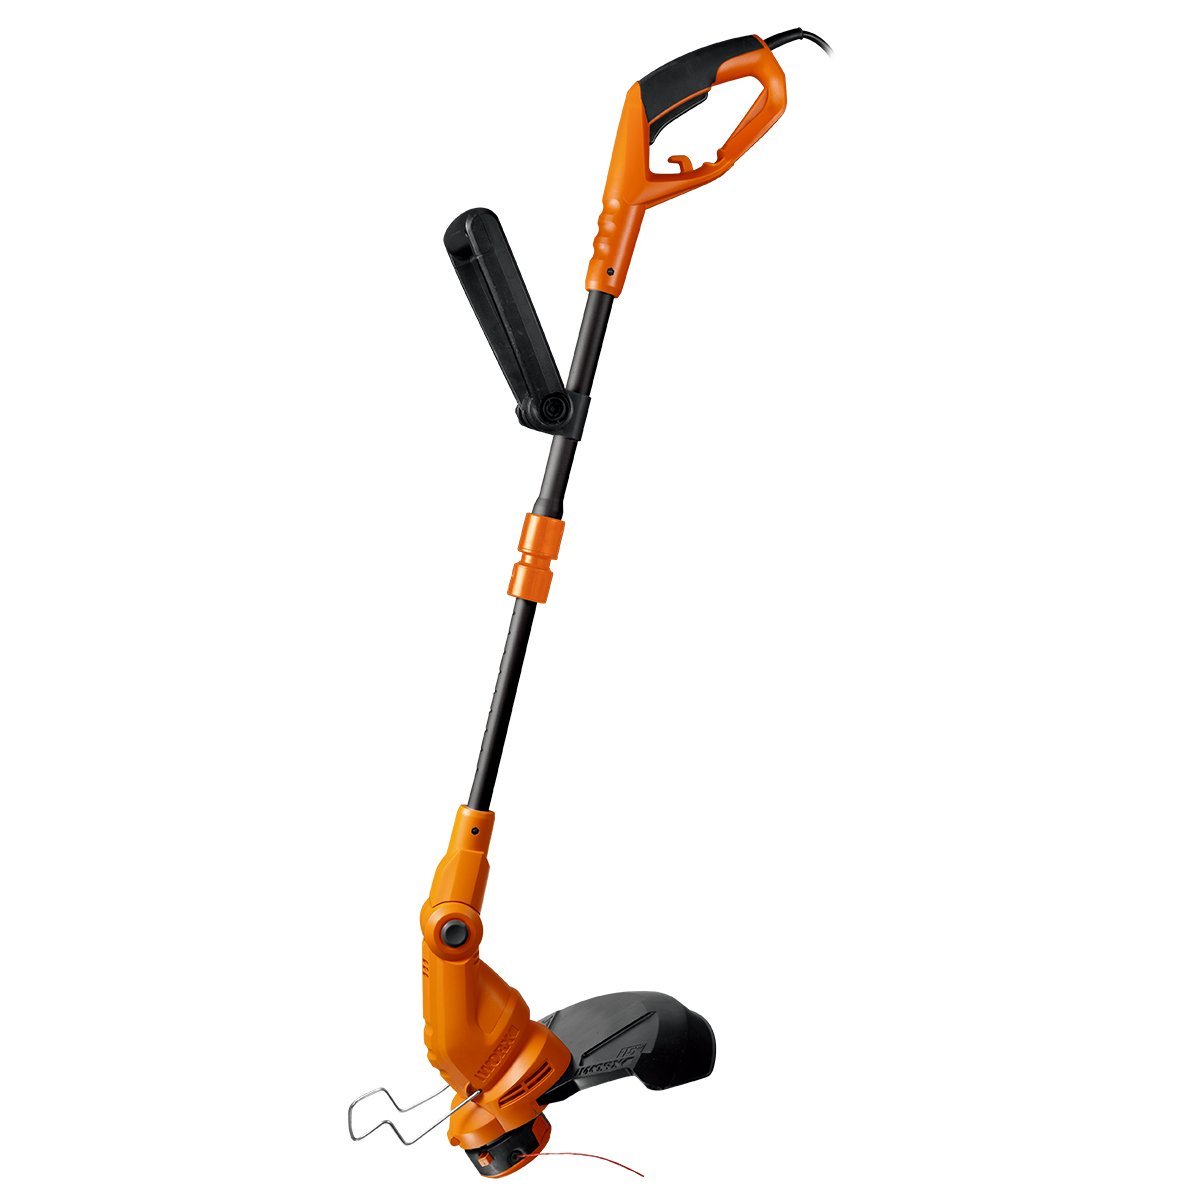 buy electric string trimmer at cheap rate in bulk. wholesale & retail lawn garden power tools store.